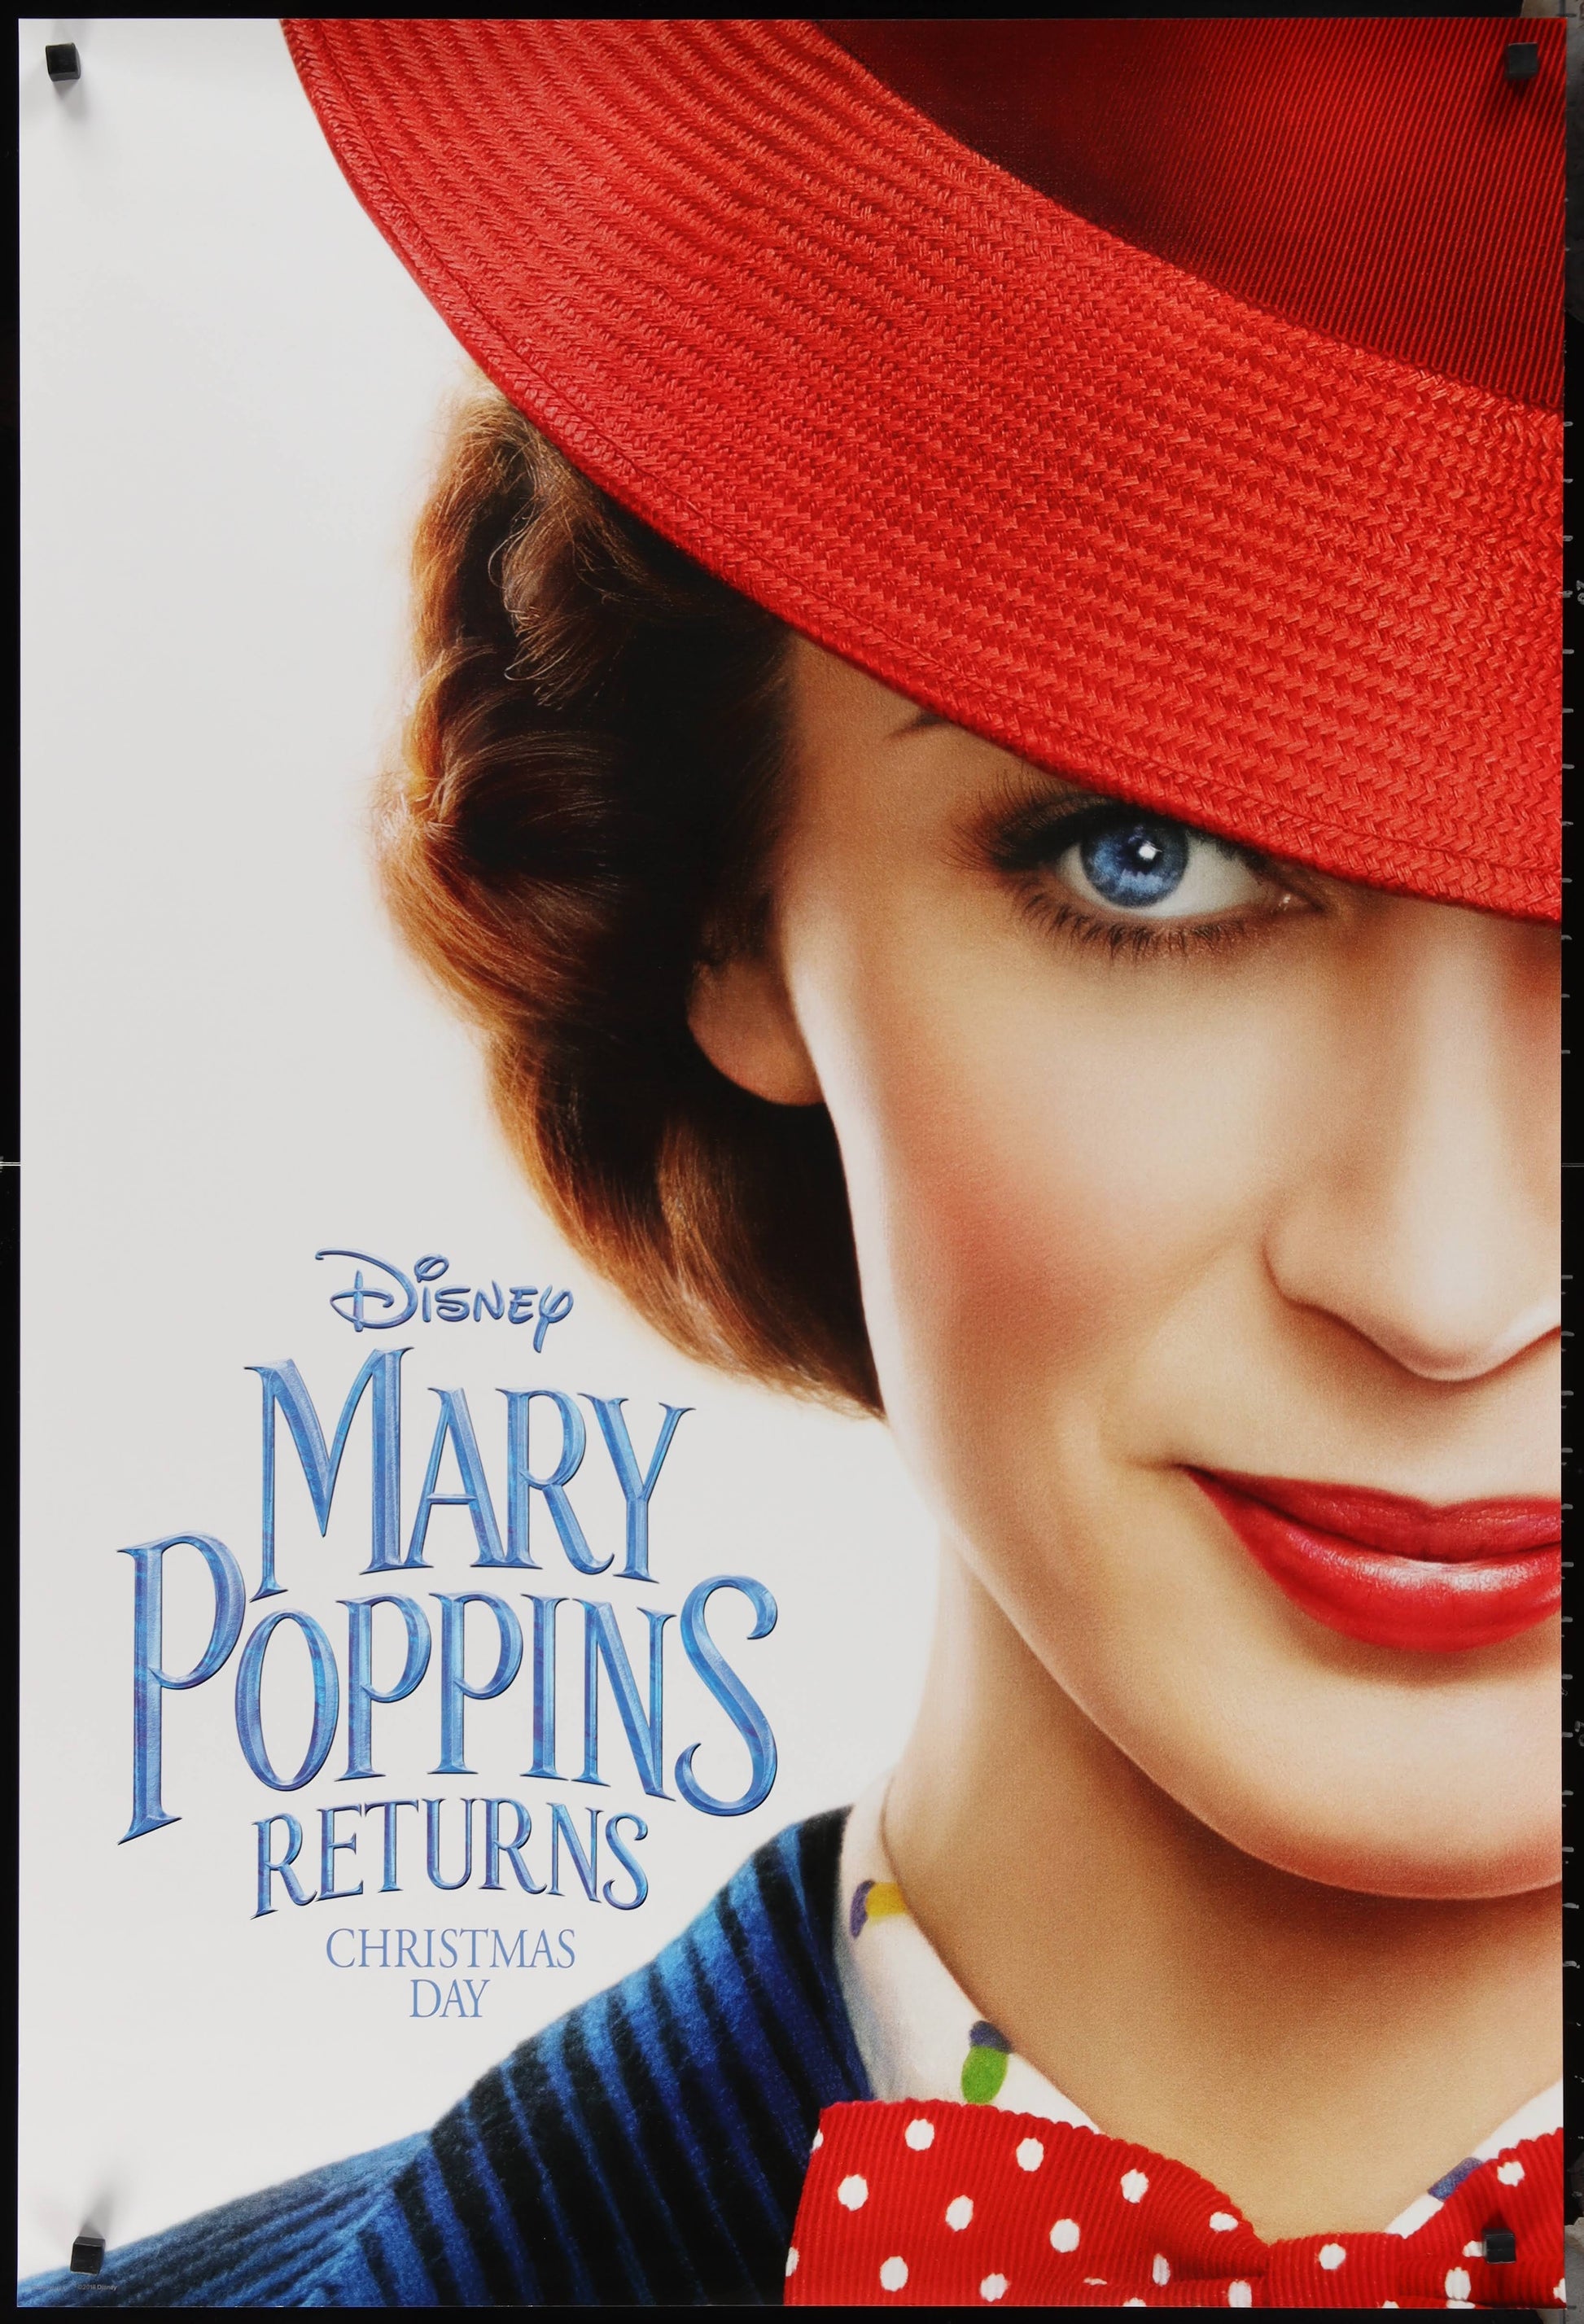 Mary Poppins Returns US One Sheet (2018) - ORIGINAL RELEASE - posterpalace.com